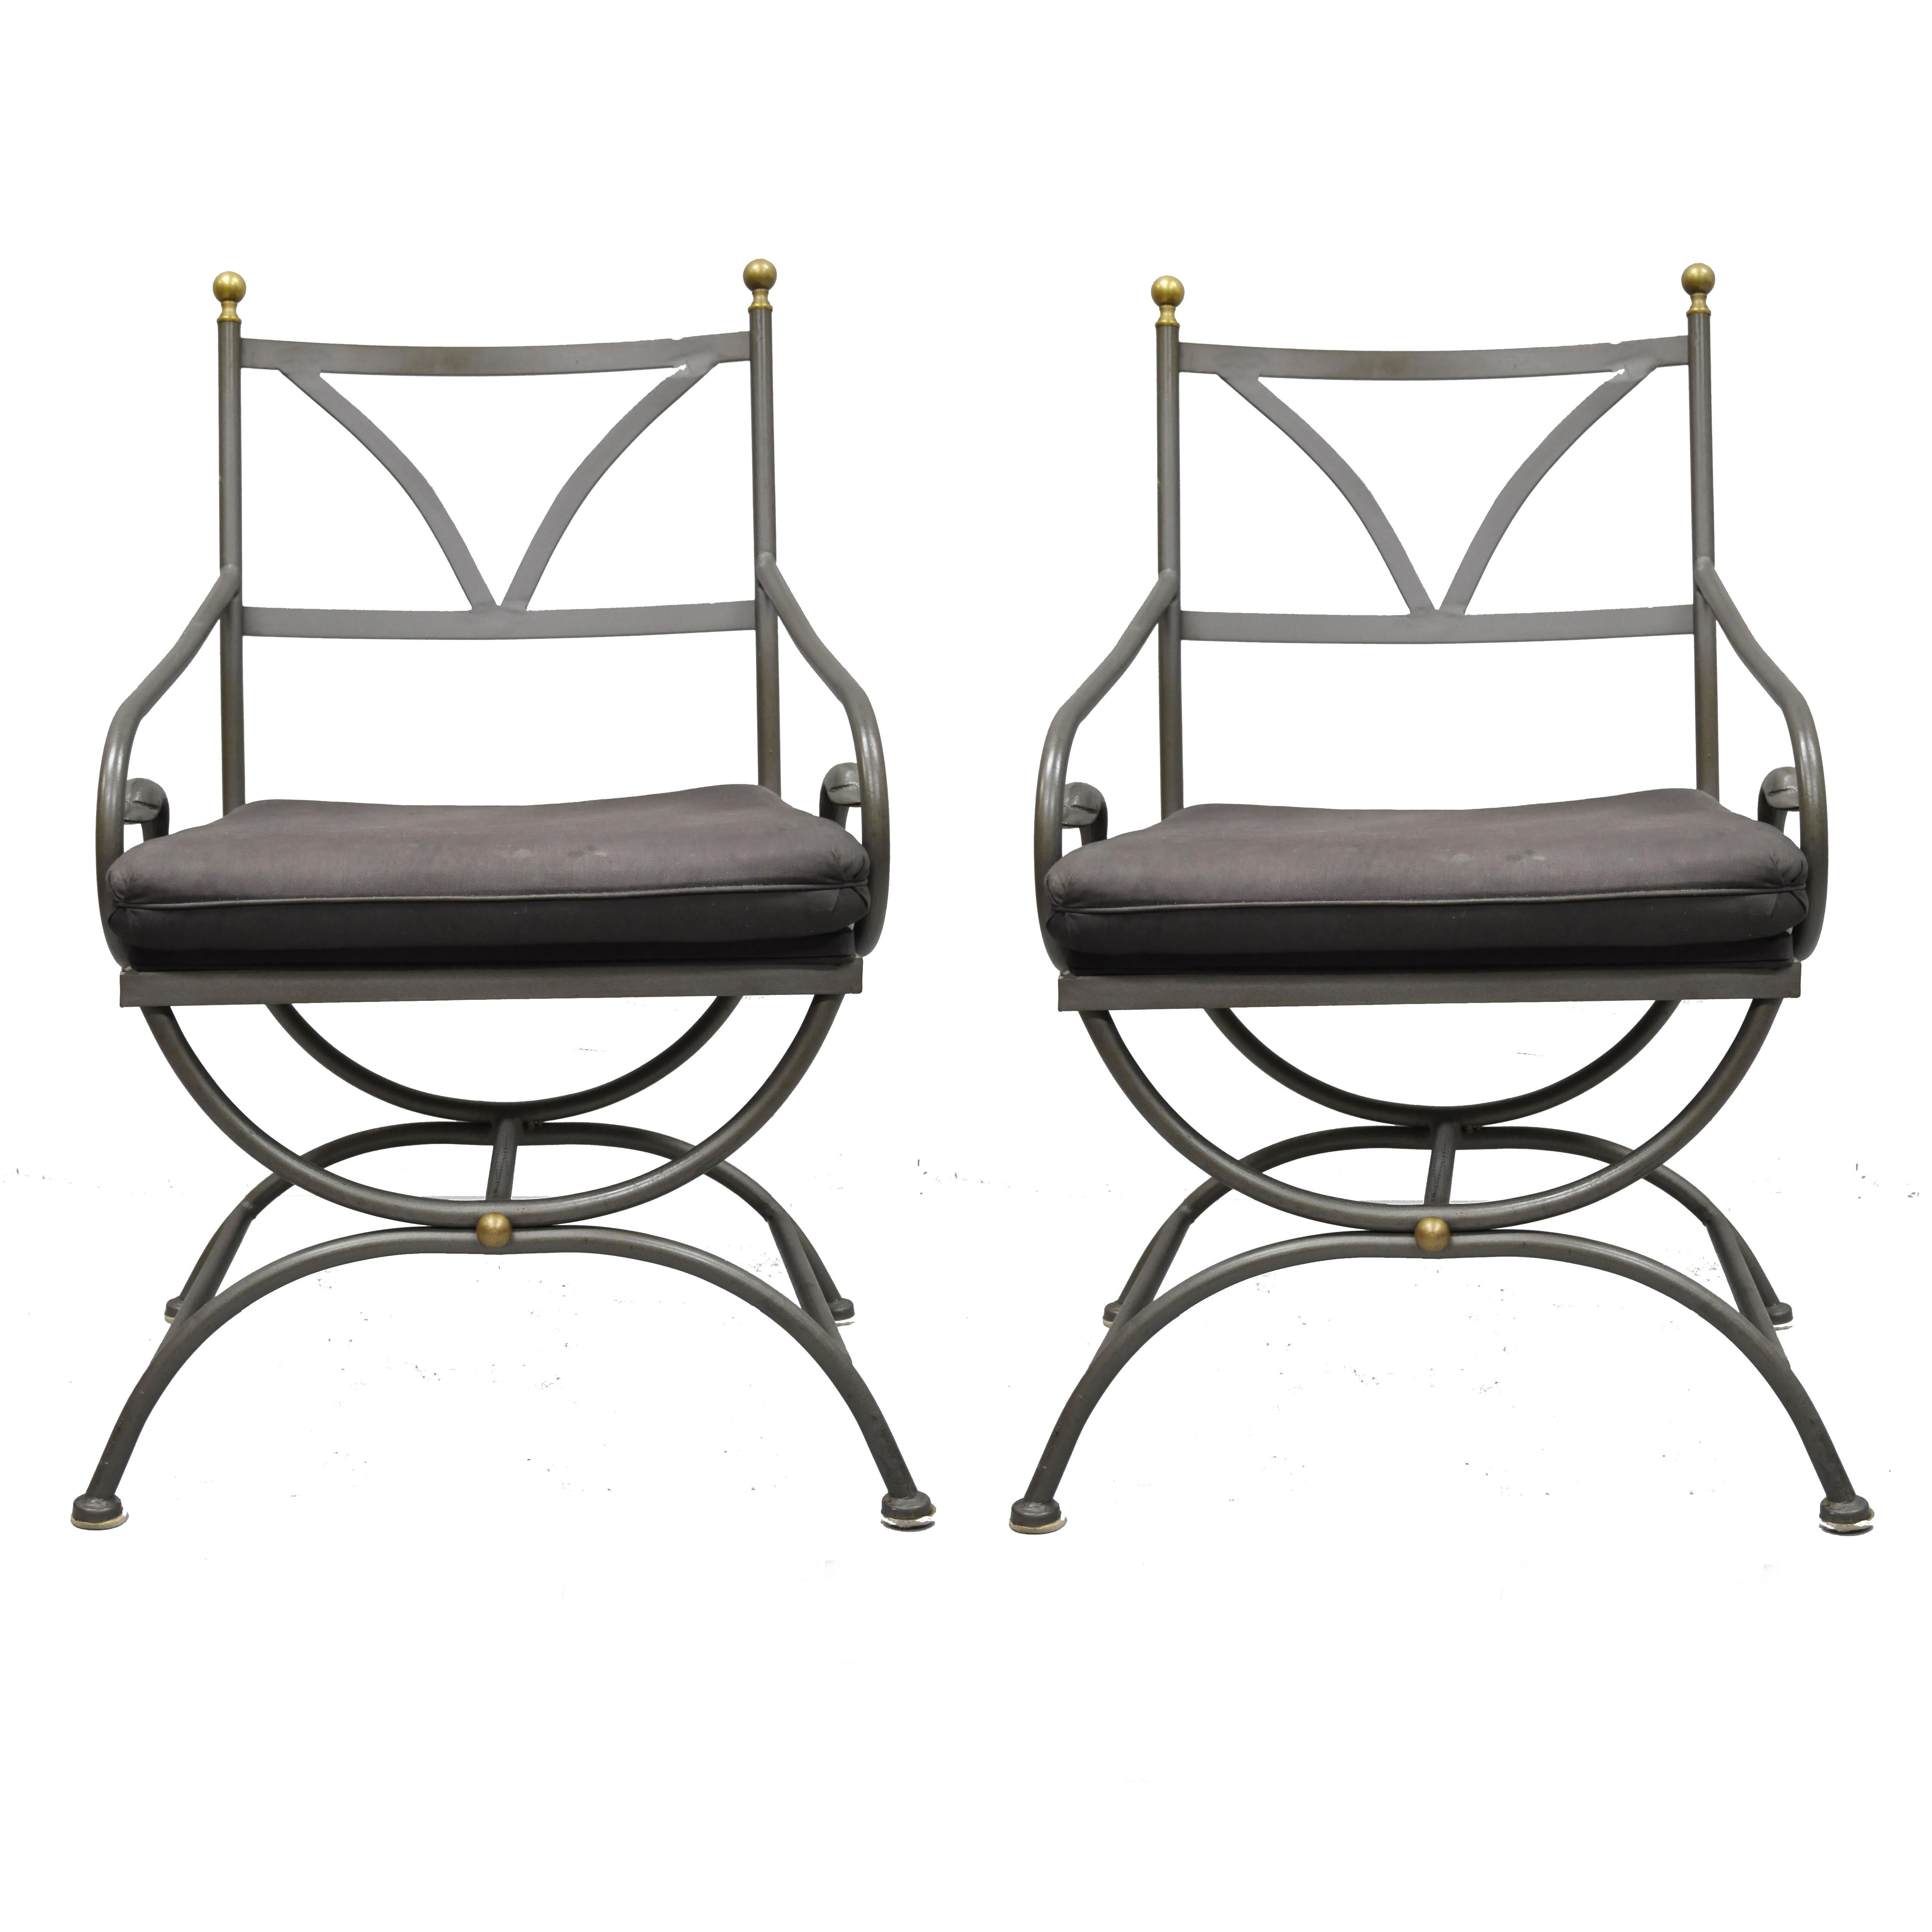 Pair of vintage French Regency style wrought iron Curule frame swan armchairs by Cramco Inc. Chairs feature swan accents, wrought iron frame, upholstered seat, original label, solid brass finials, quality craftsmanship, circa late 20th century.